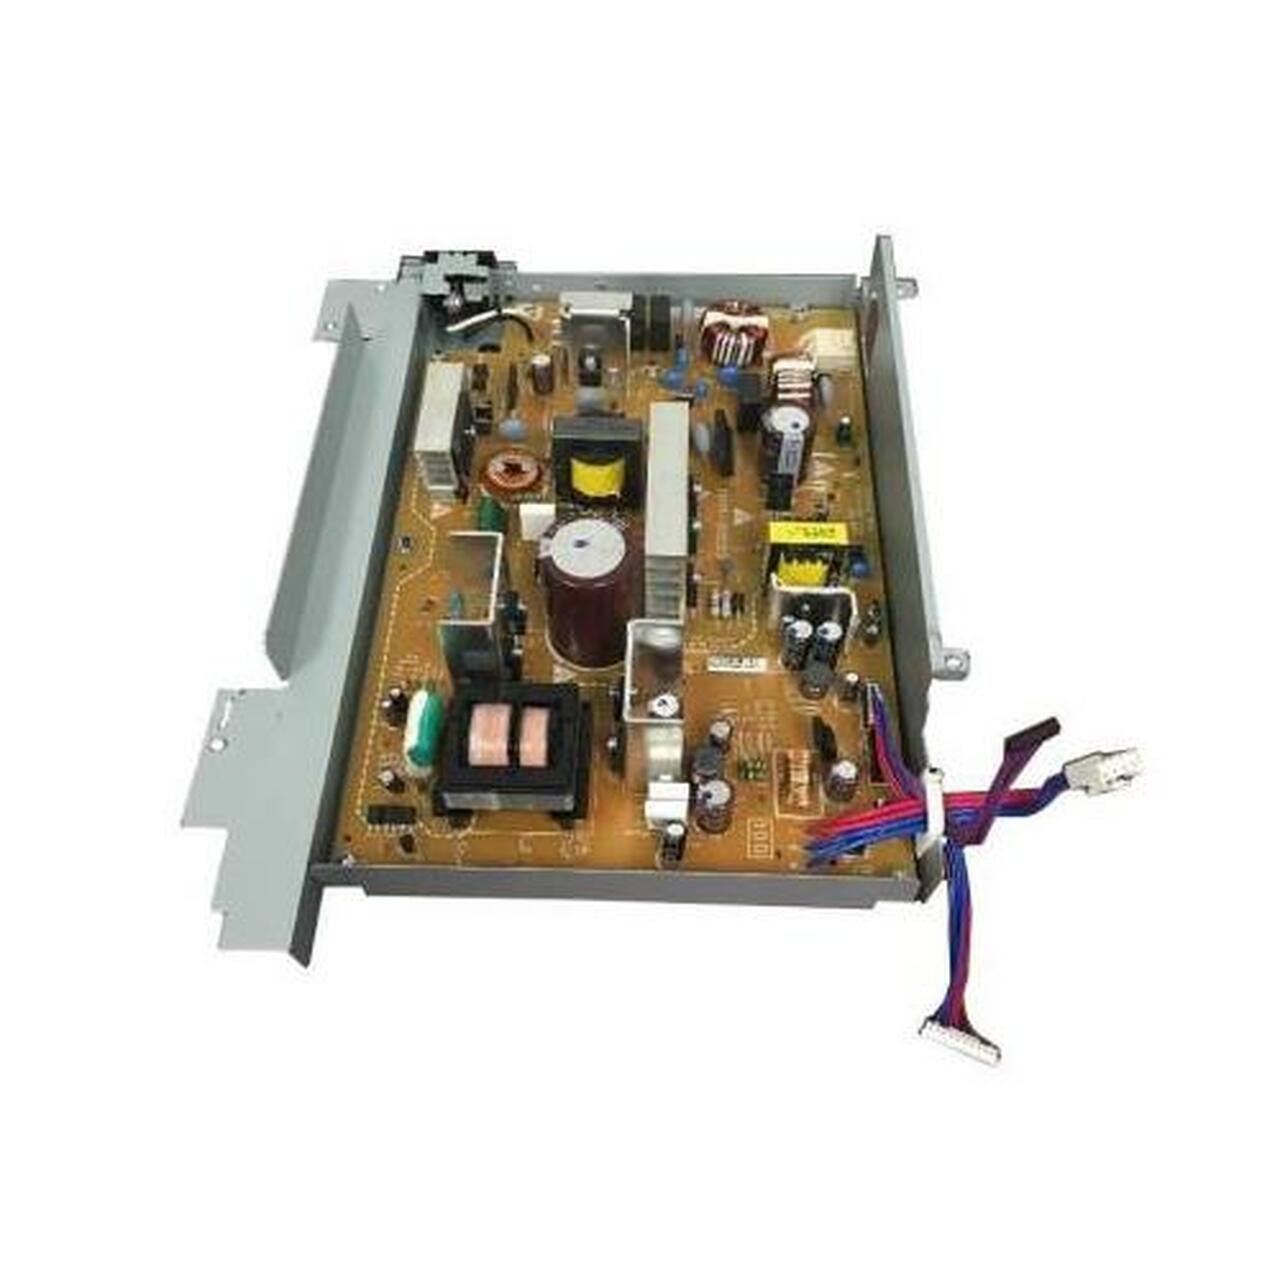 HP Refurbished RM1-8744 Low Voltage Power Supply (110V)